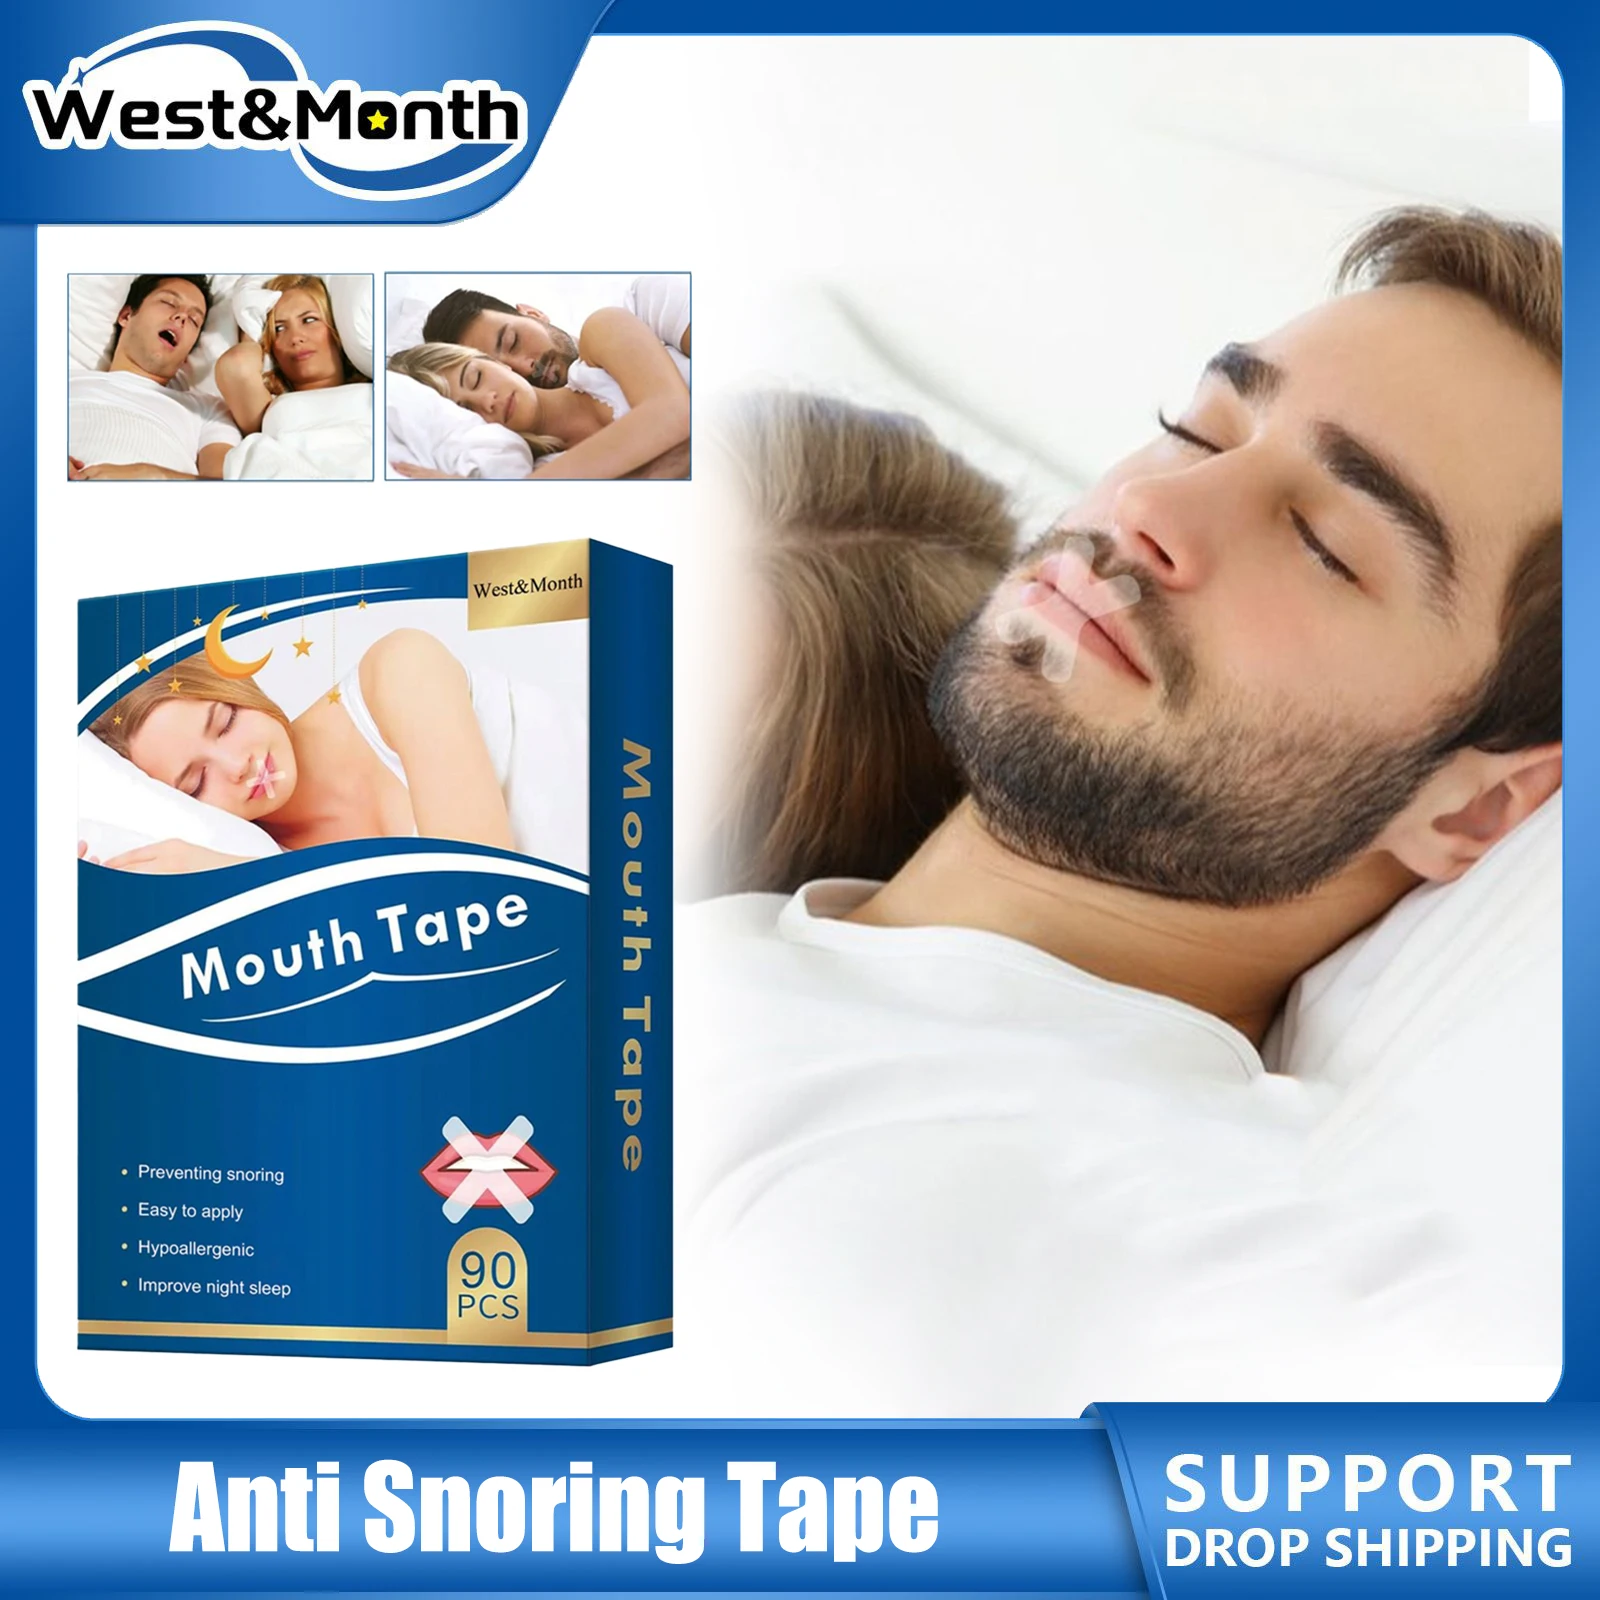 Anti Snoring Mouth Tape Through The Nose Effective Breathing Nighttime Sleeping Reduce Snore Health Care Relax Body Sleep Strip